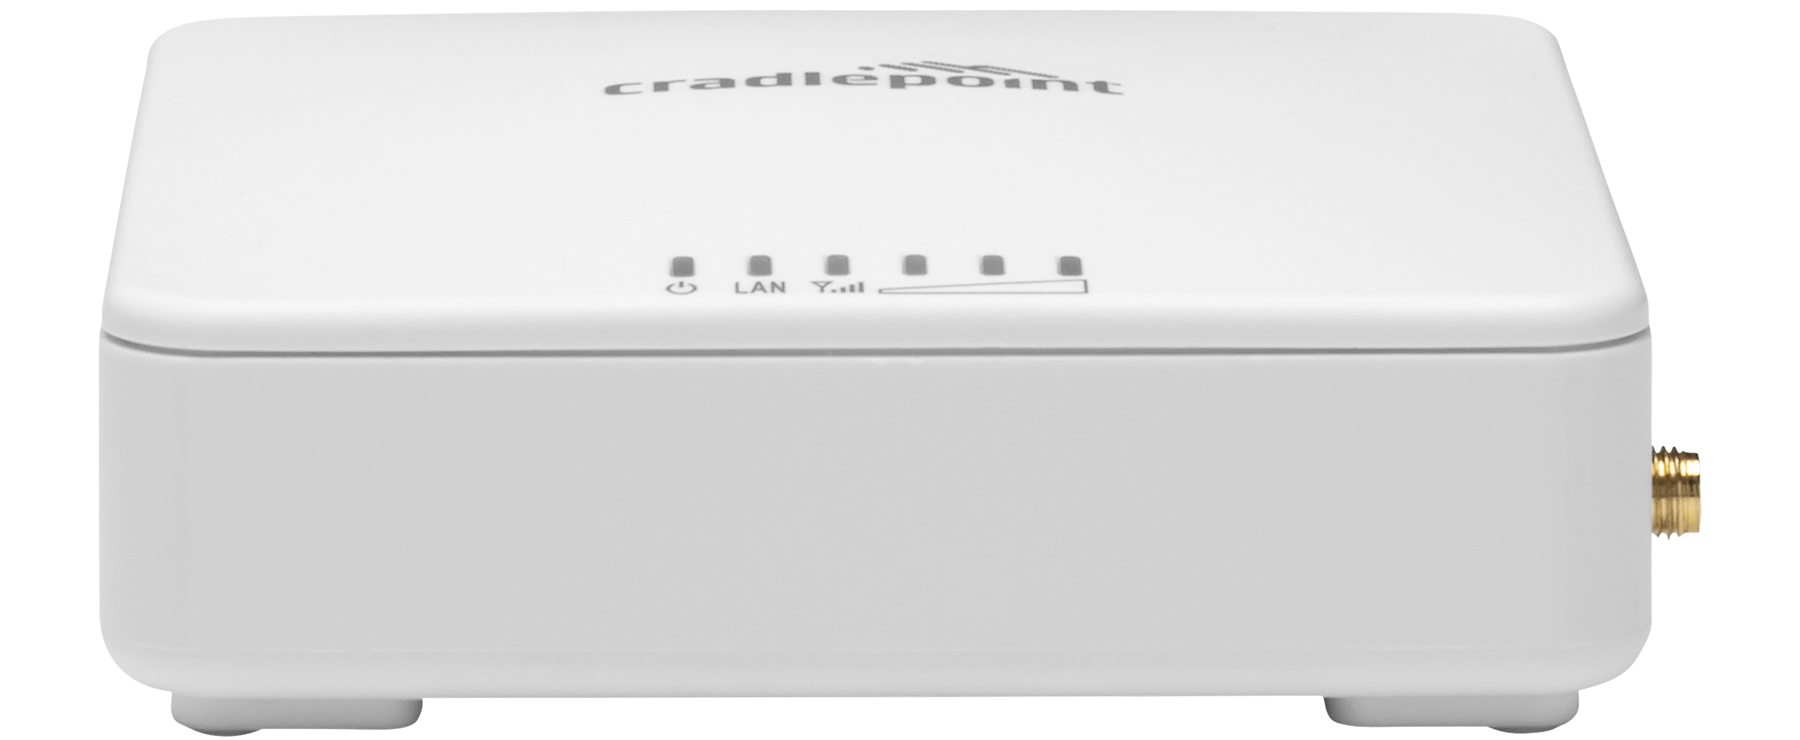 cba550-feaimg-1800x740-1 Cradlepoint Wireless Routers